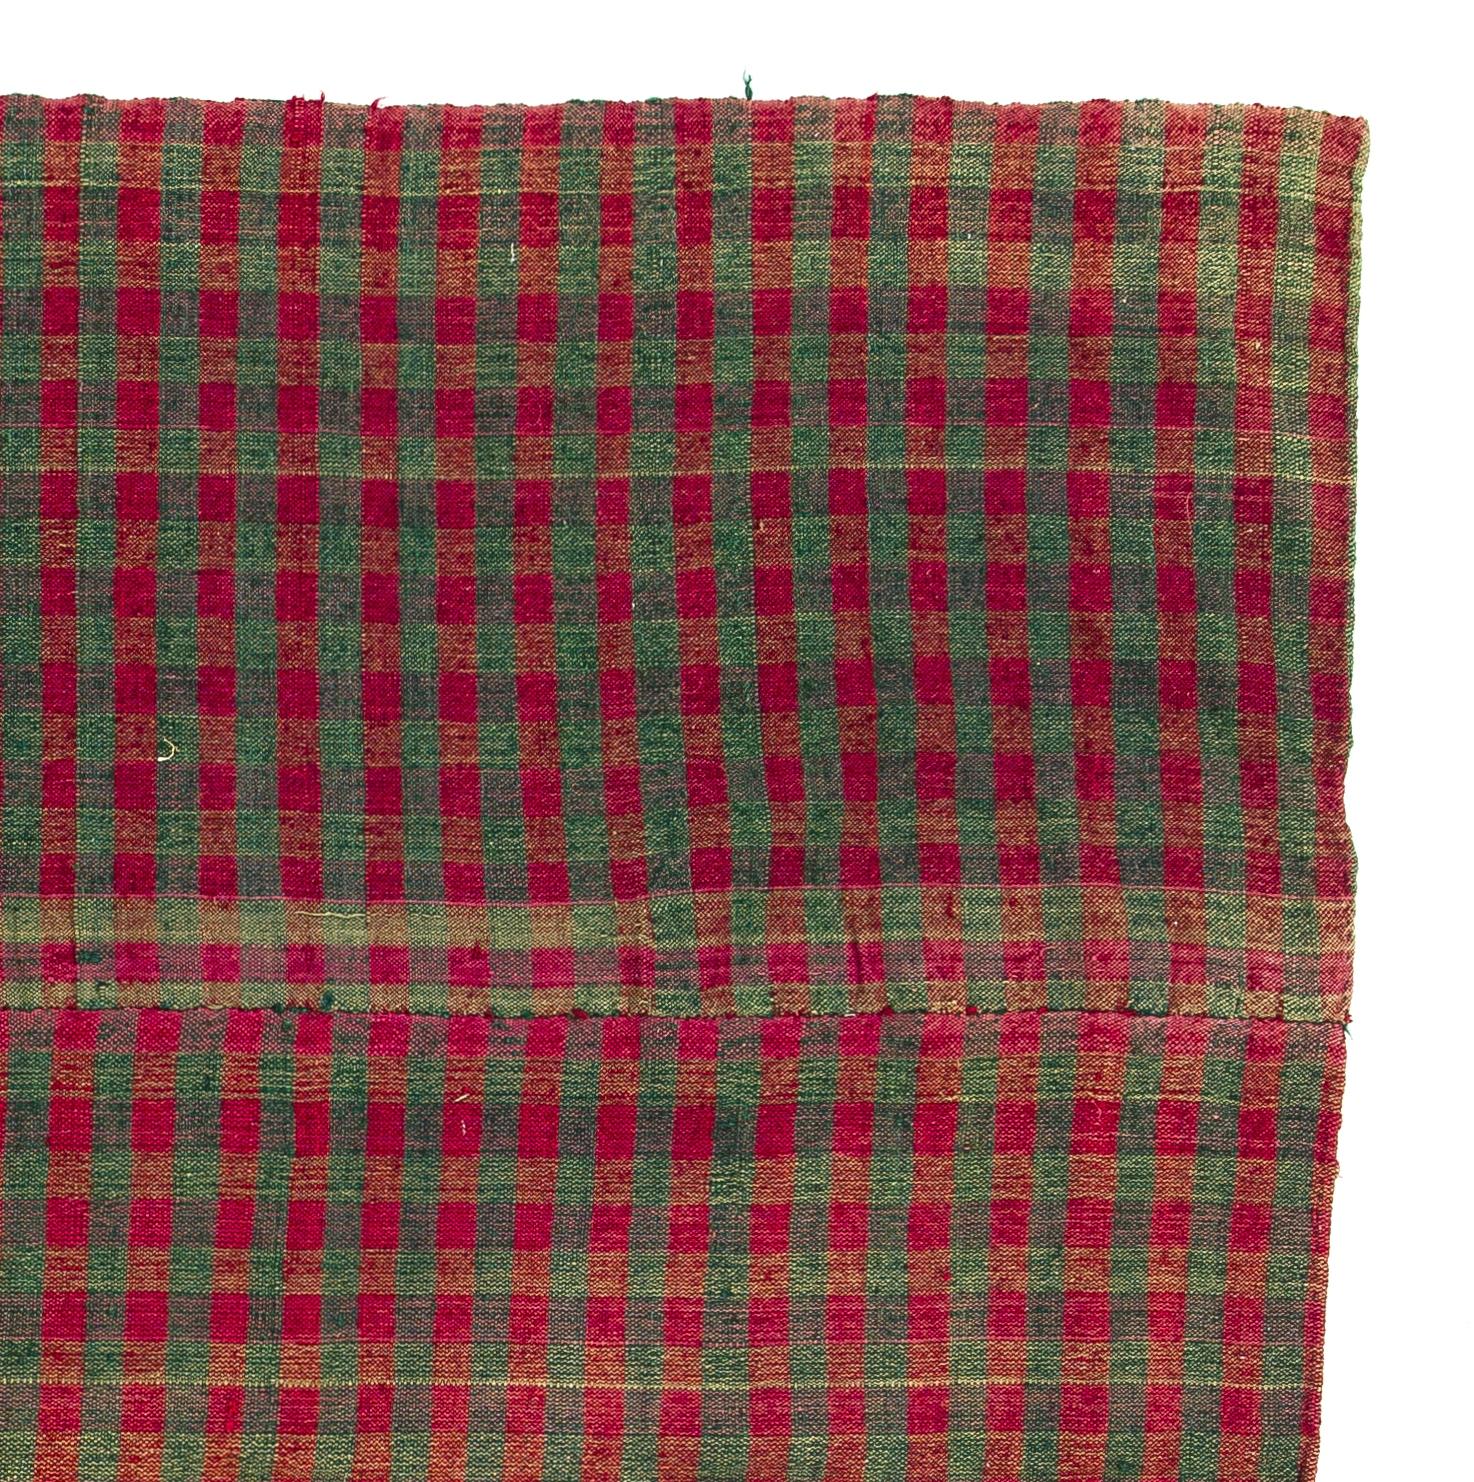 Turkish 4.4x5 Ft Chequered Wool Kilim Rug in Red & Green Colors. Soft Floppy Handle. 